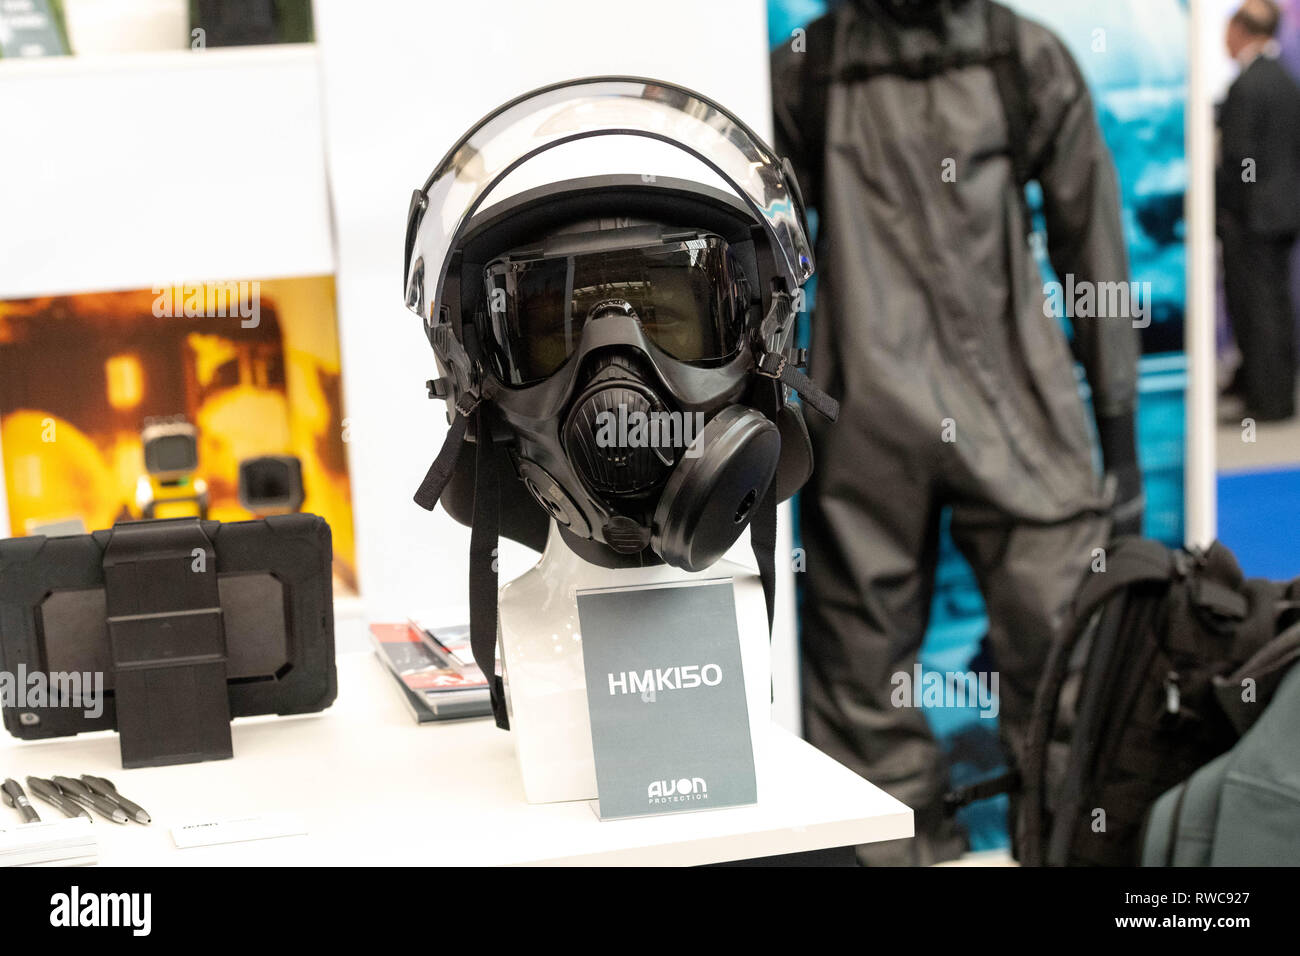 London 6th March 2019 Security and Counter Terror Expo 2019 at Olympia London A respirator for chemical, Nuclear and Biological attack protection Credit: Ian Davidson/Alamy Live News Stock Photo